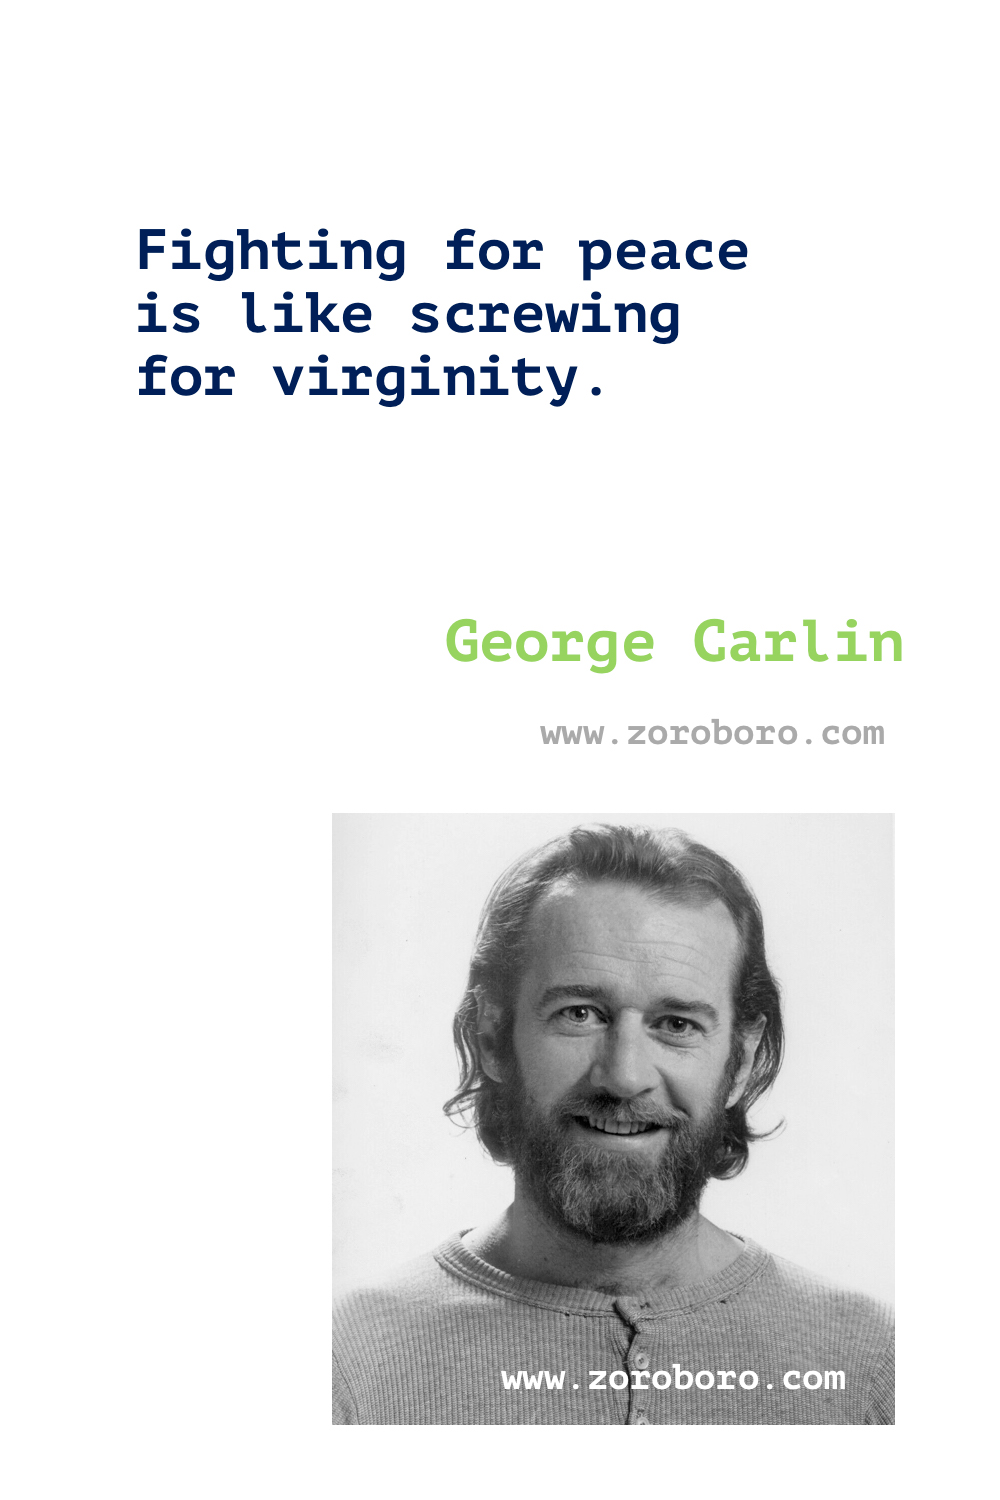 George Carlin Quotes. George Carlin Books Quotes. George Carlin Funny Stand-up Quotes. George Carlin Comedian.george carlin quotes something to ponder.george carlin quotes on politics.george carlin quotes government.george carlin quotes on america.george carlin quote about life.george carlin quotes life is not measured.george carlin quotes on death.george carlin quotes on war